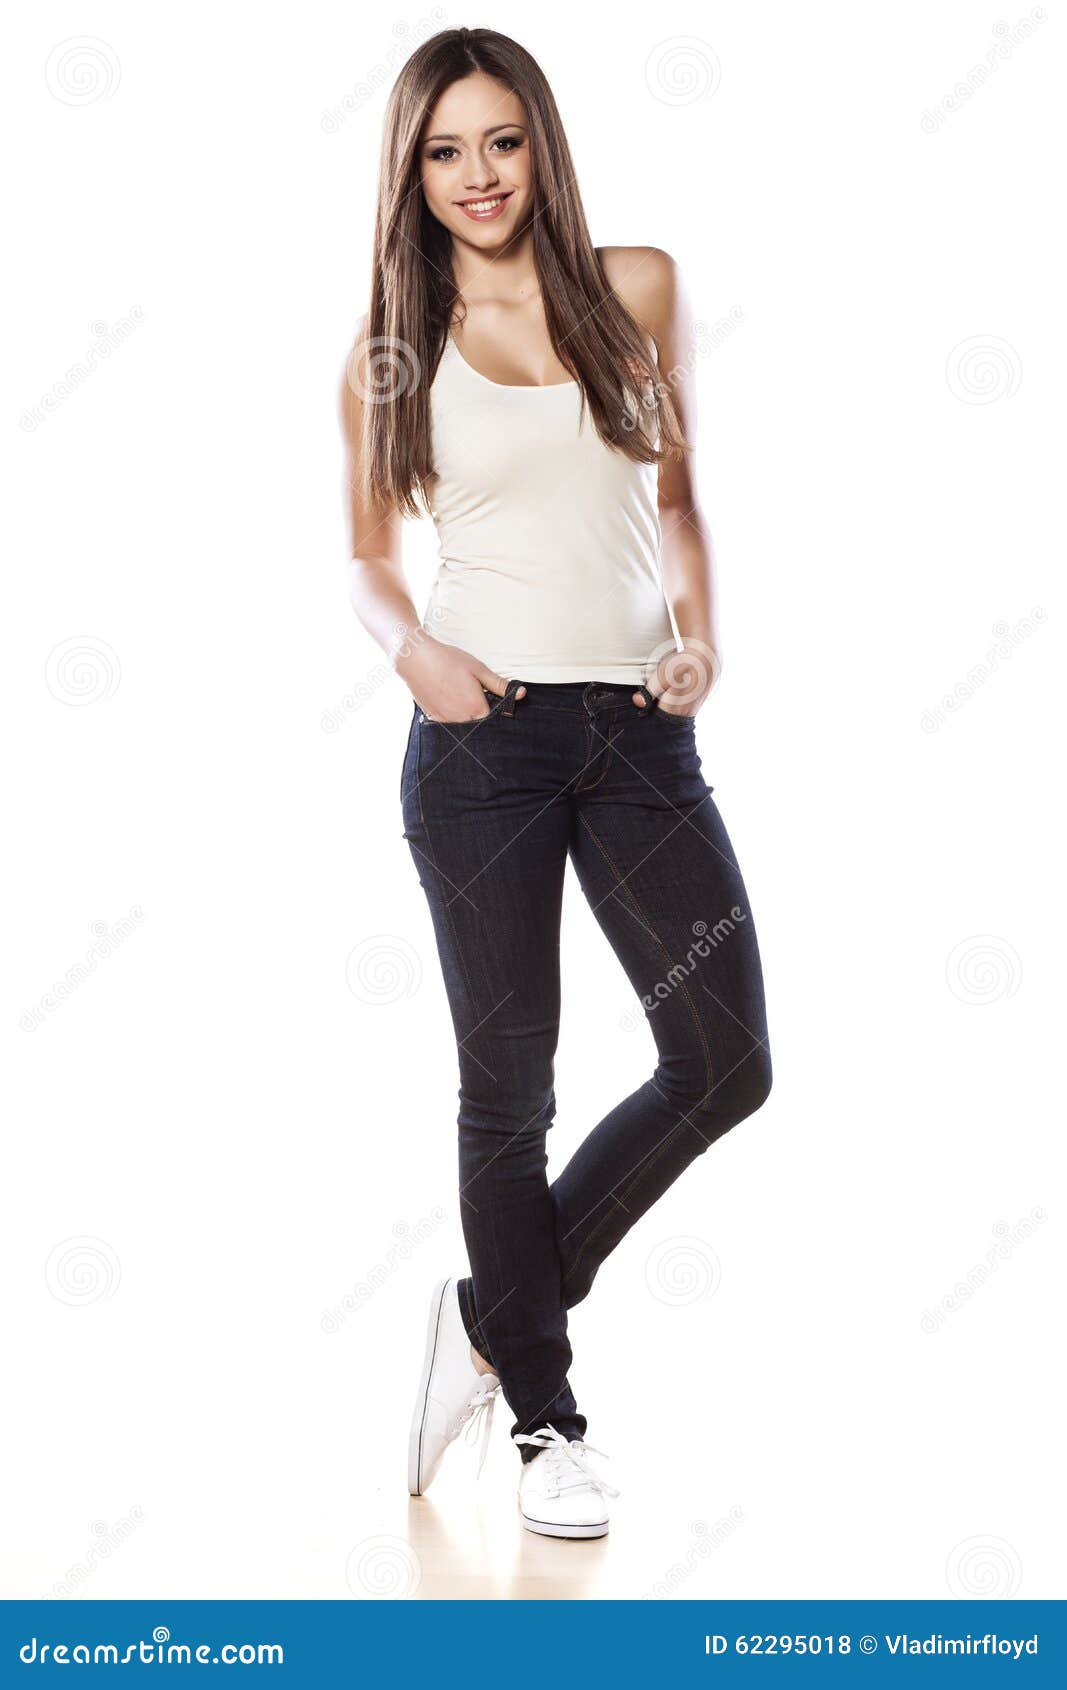 Smiling girl stock photo. Image of student, jeans, person - 62295018